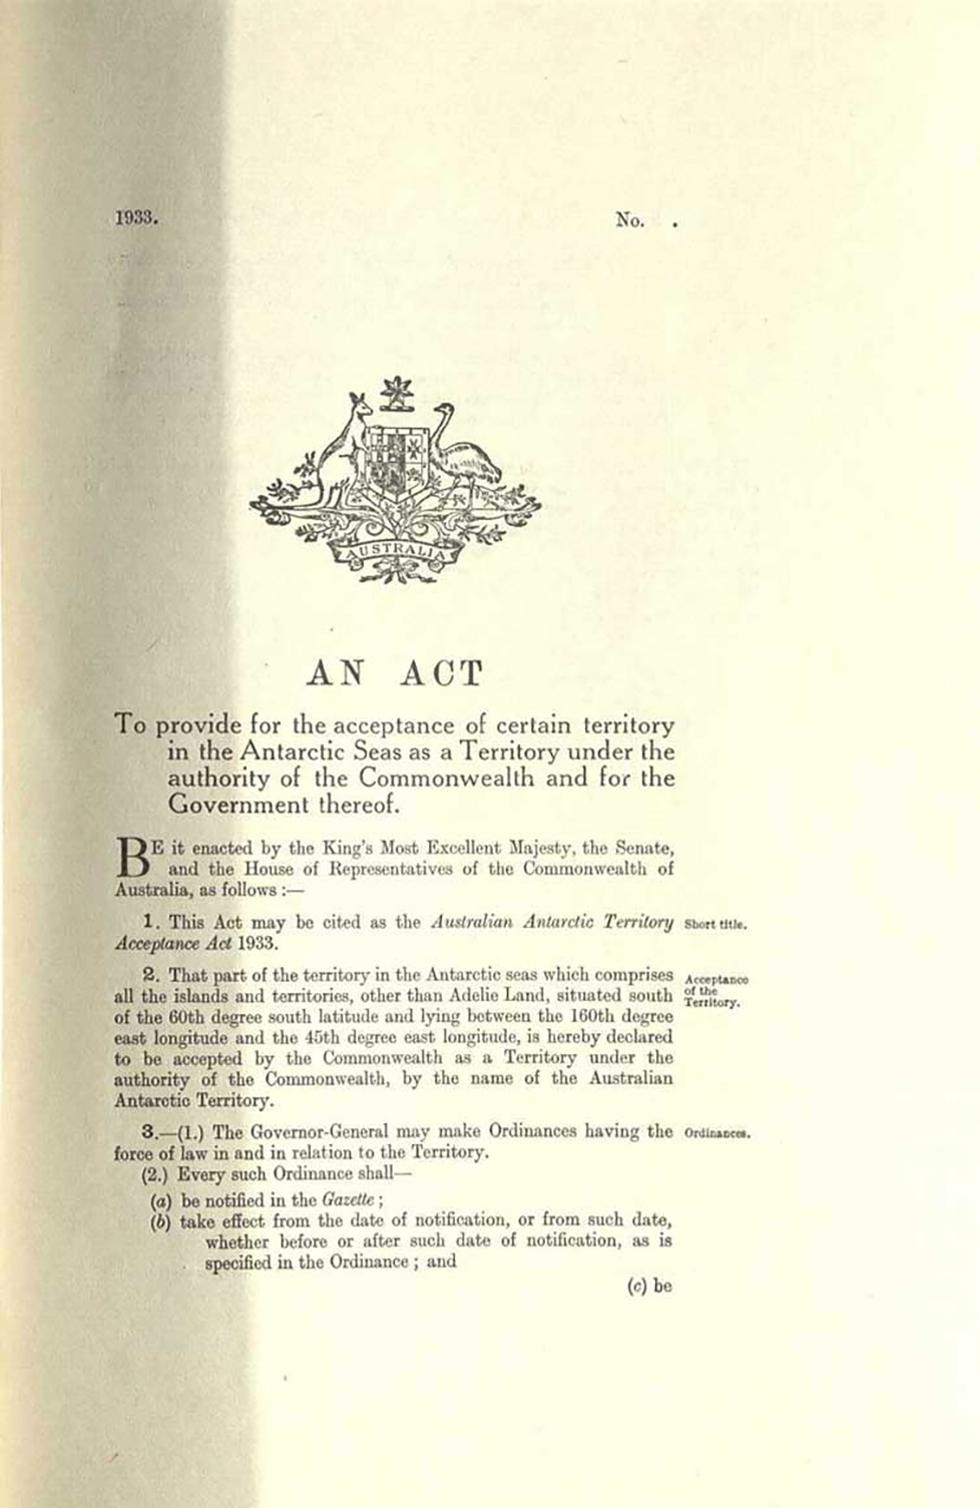 An Act to provide for the acceptance of certain territory in the Antarctic Seas as a Territory under the authority of the Commonwealth and for the Government thereof.